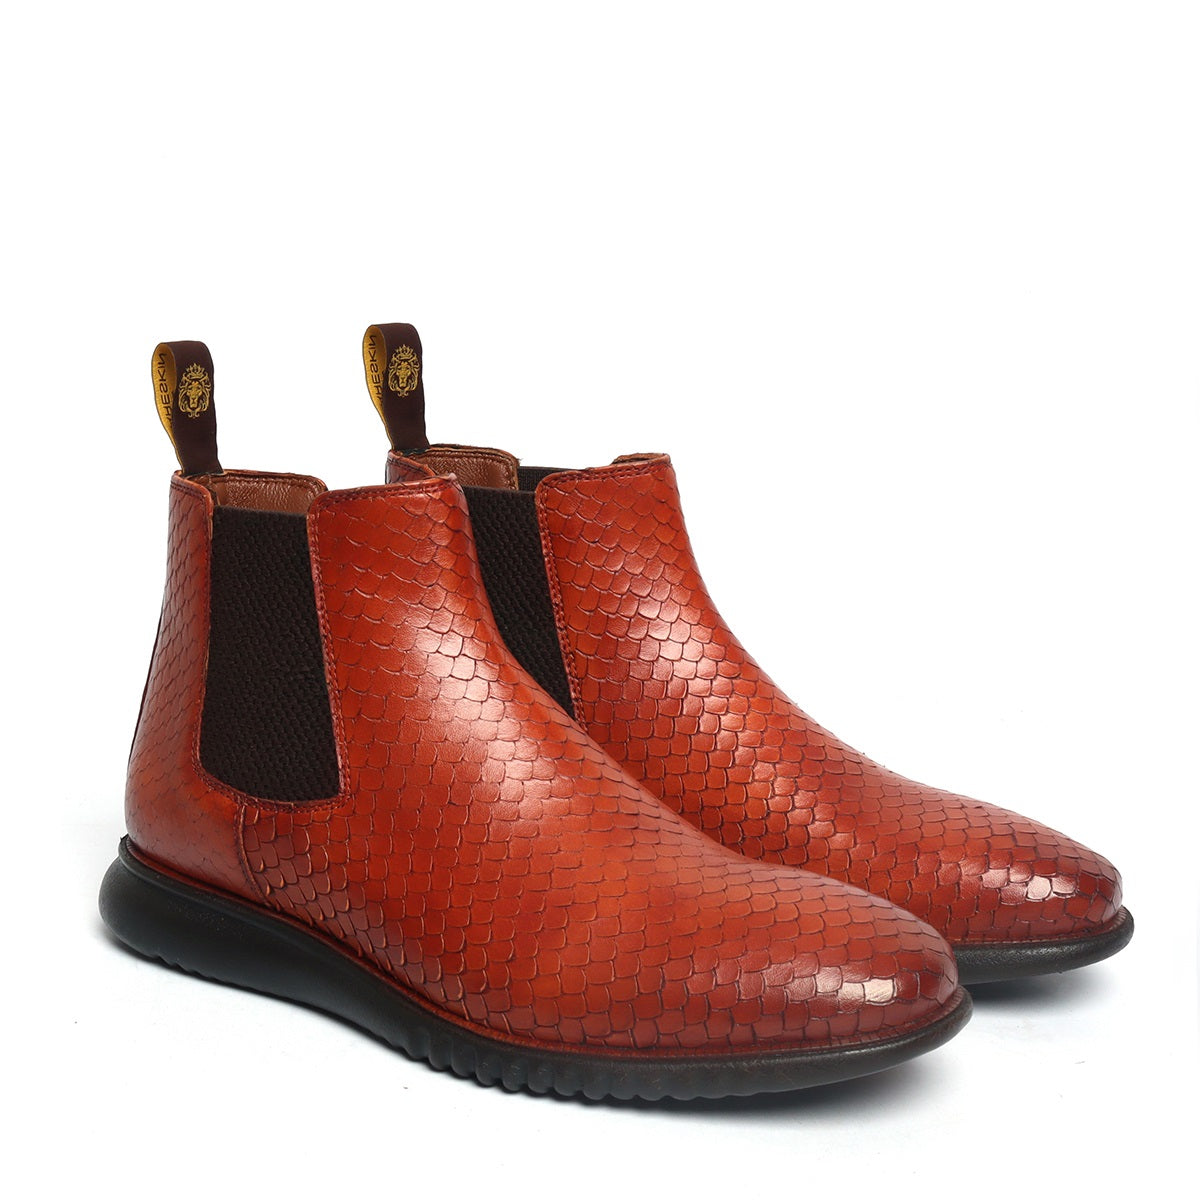 Hand scaling Tan Chelsea Boot in Snake Skin Textured Leather and Light weight sole By Brune & Bareskin